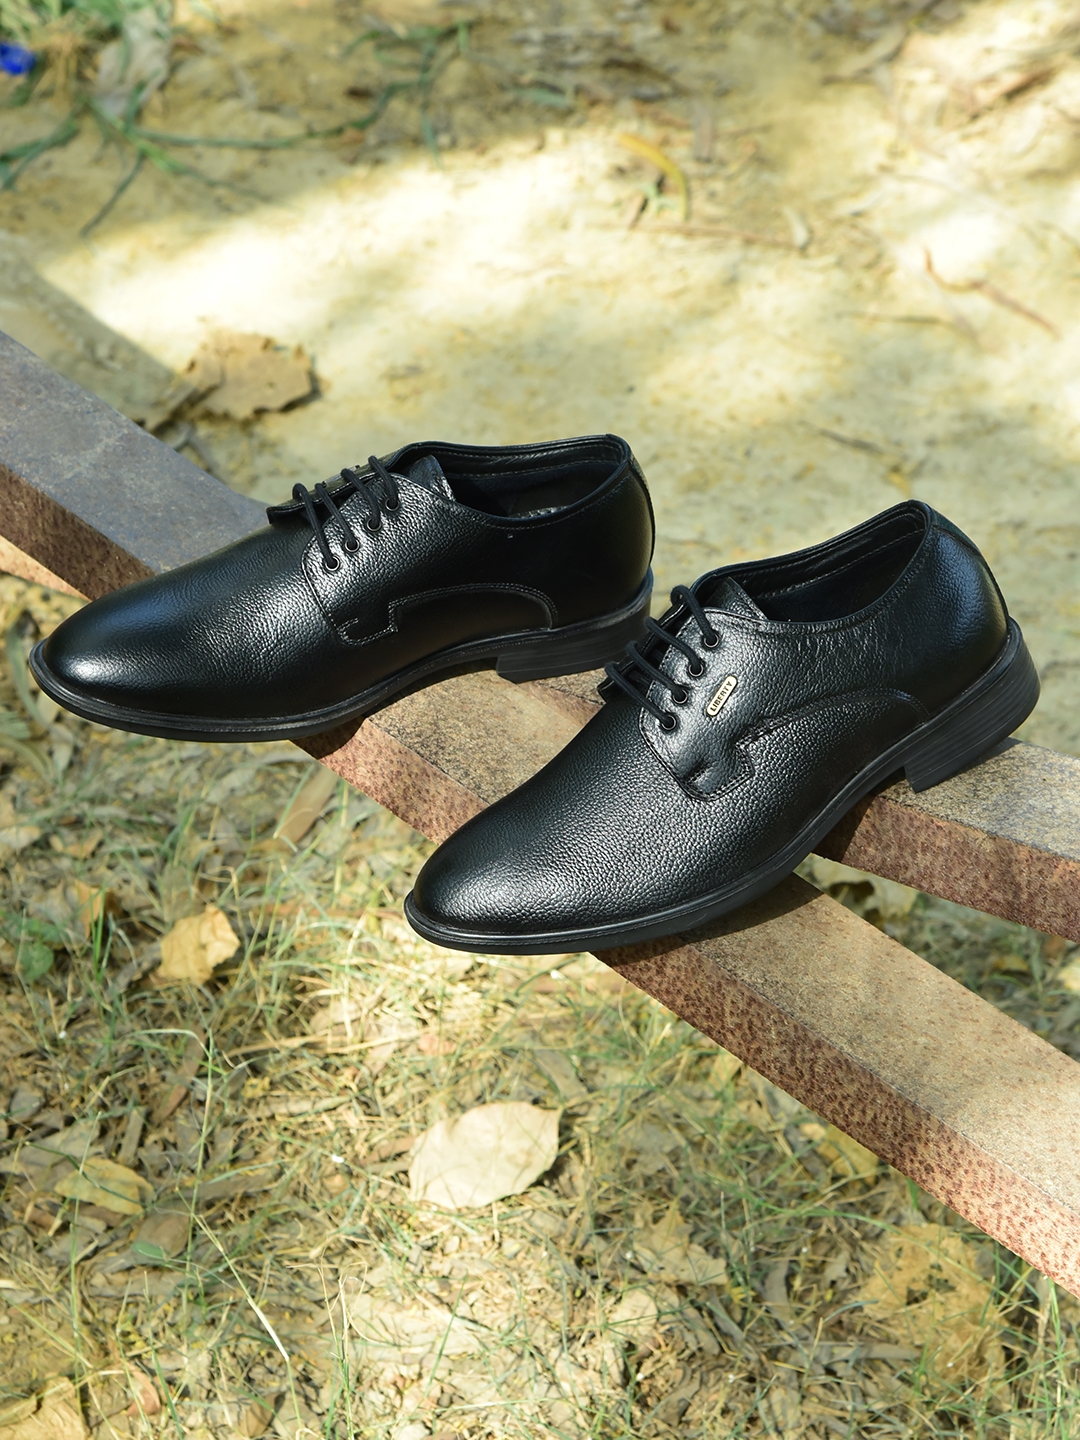 Fortune by Liberty LOM-605 Black Formal Shoes for Men